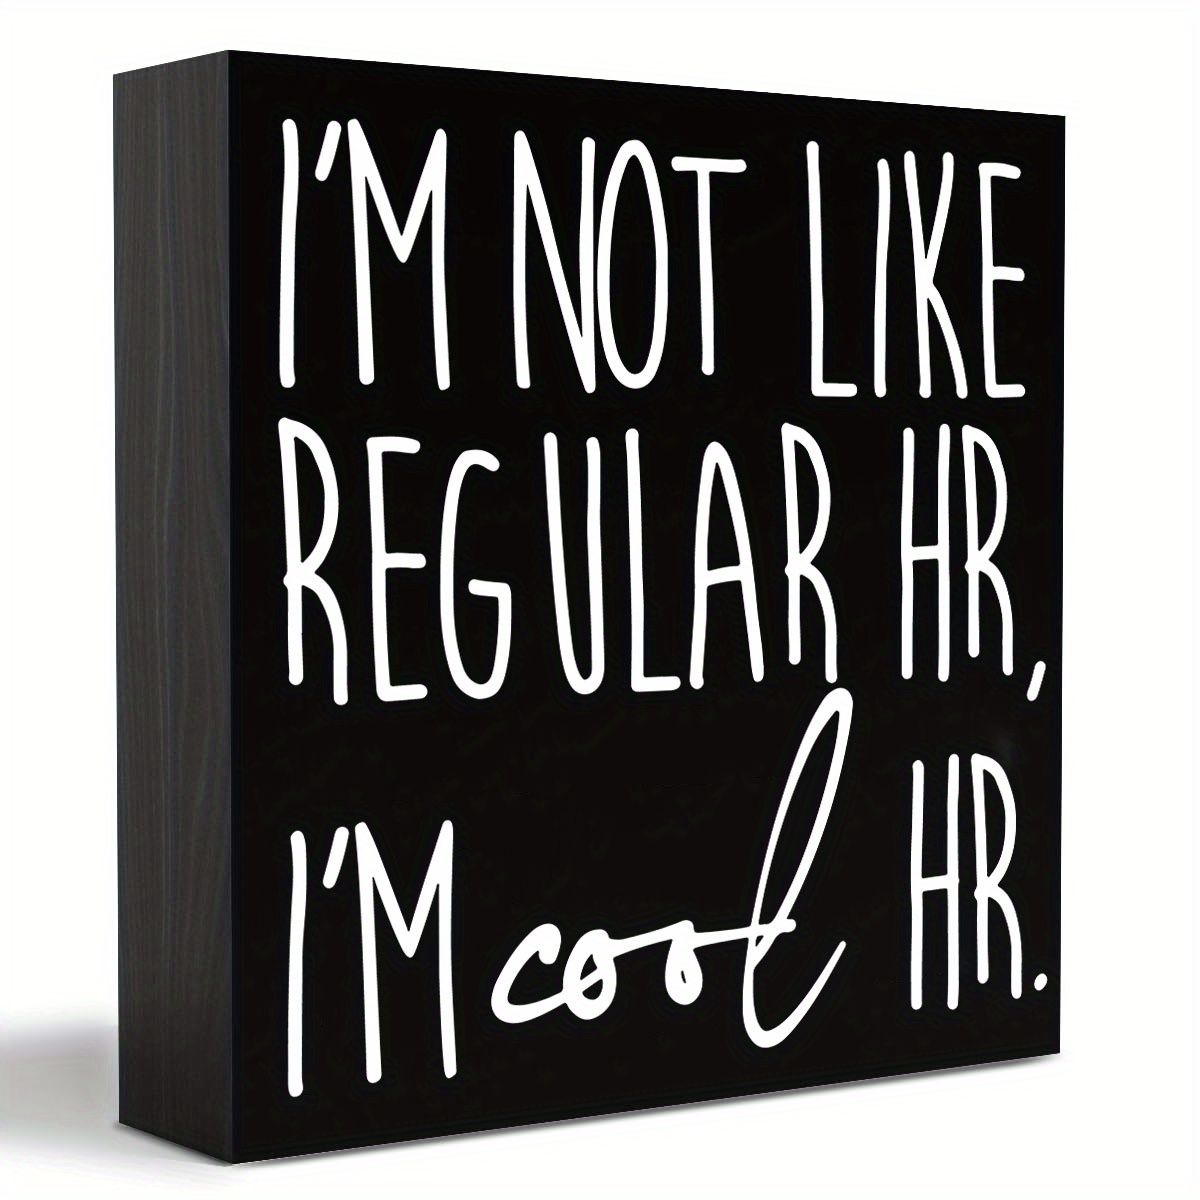 

1pc, I'm Not Like Regular Hr I'm Cool Hr Wood Box Sign Decor Desk Sign,funny Office Wooden Box Block Sign For Human Resource Hr Office Shelf Table Decor Decorations